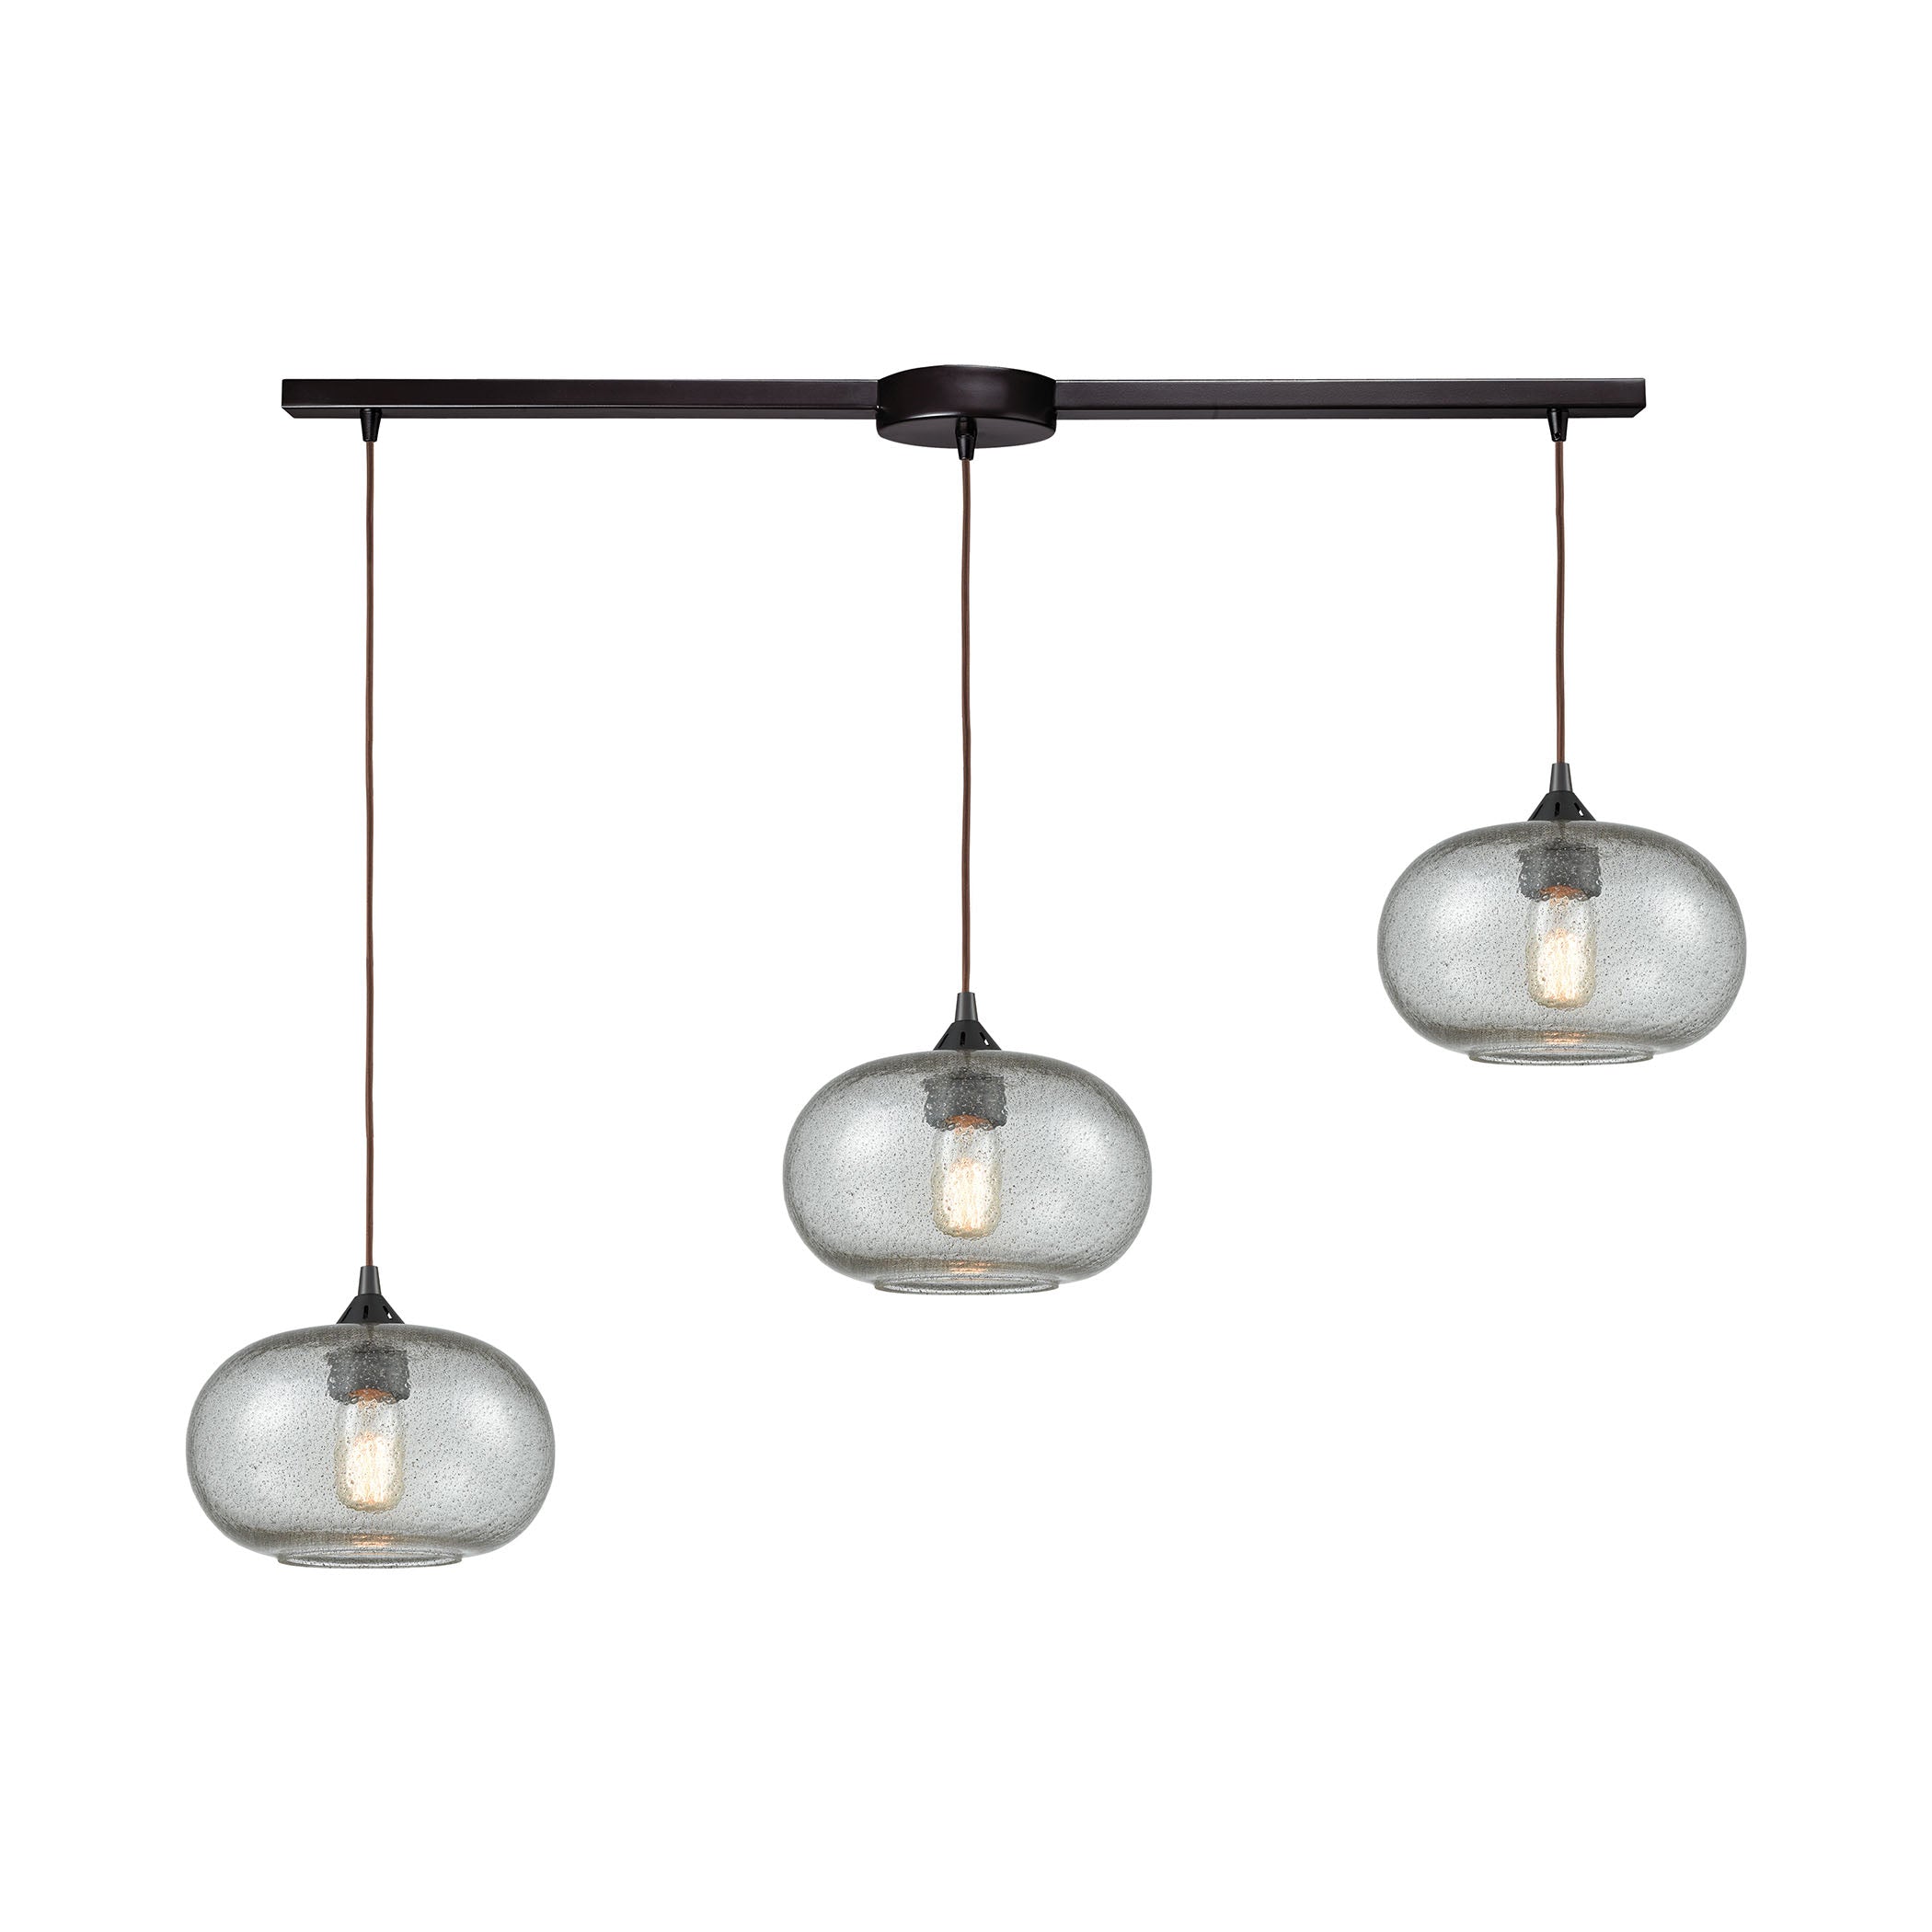 ELK Lighting 25124/3L Volace 3-Light Linear Mini Pendant Fixture in Oiled Bronze with Rotunde Gray Speckled Blown Glass